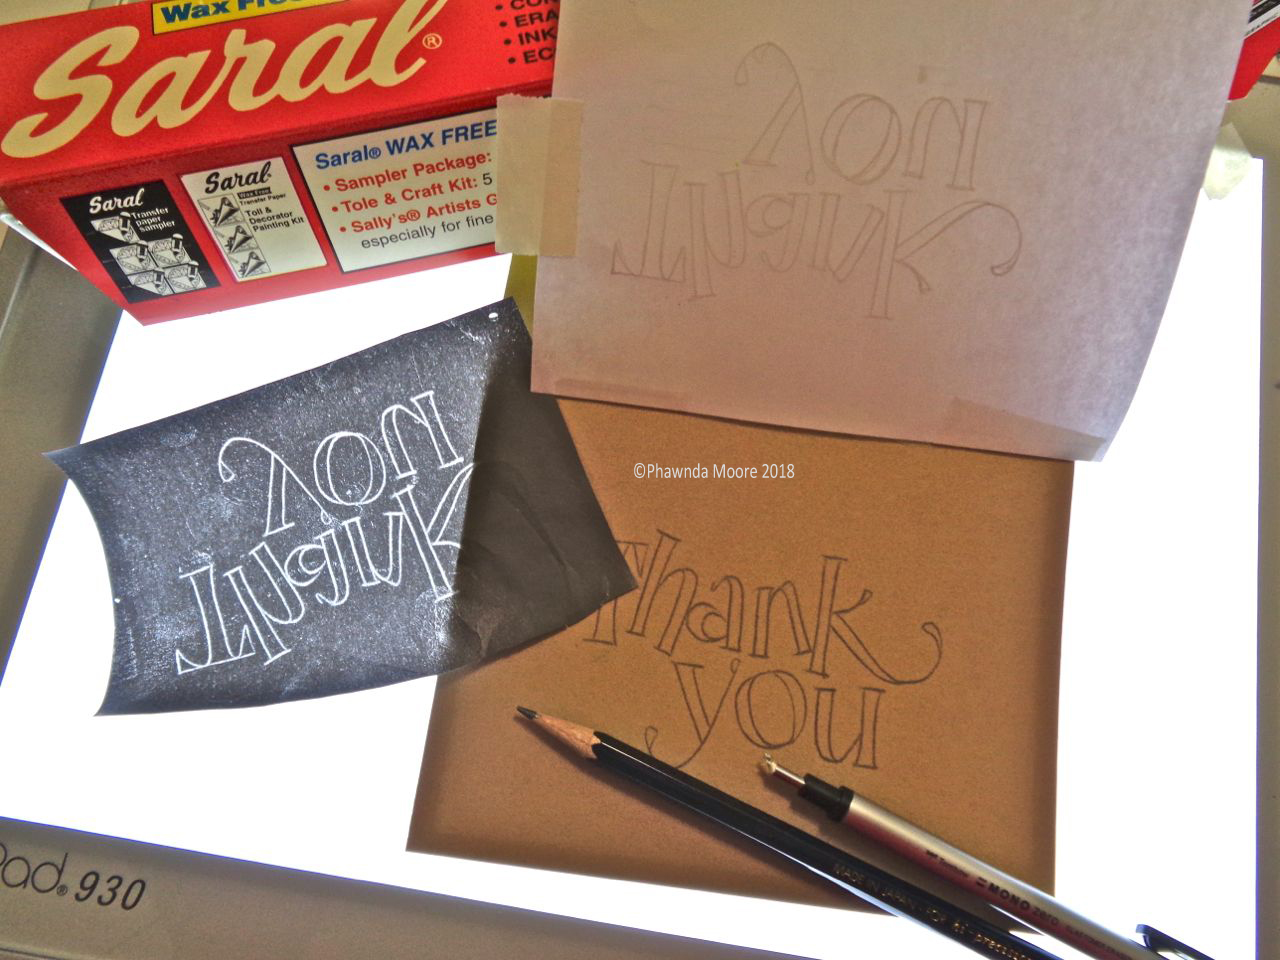 Tips and tricks for creating your own thank you cards with #Tombow